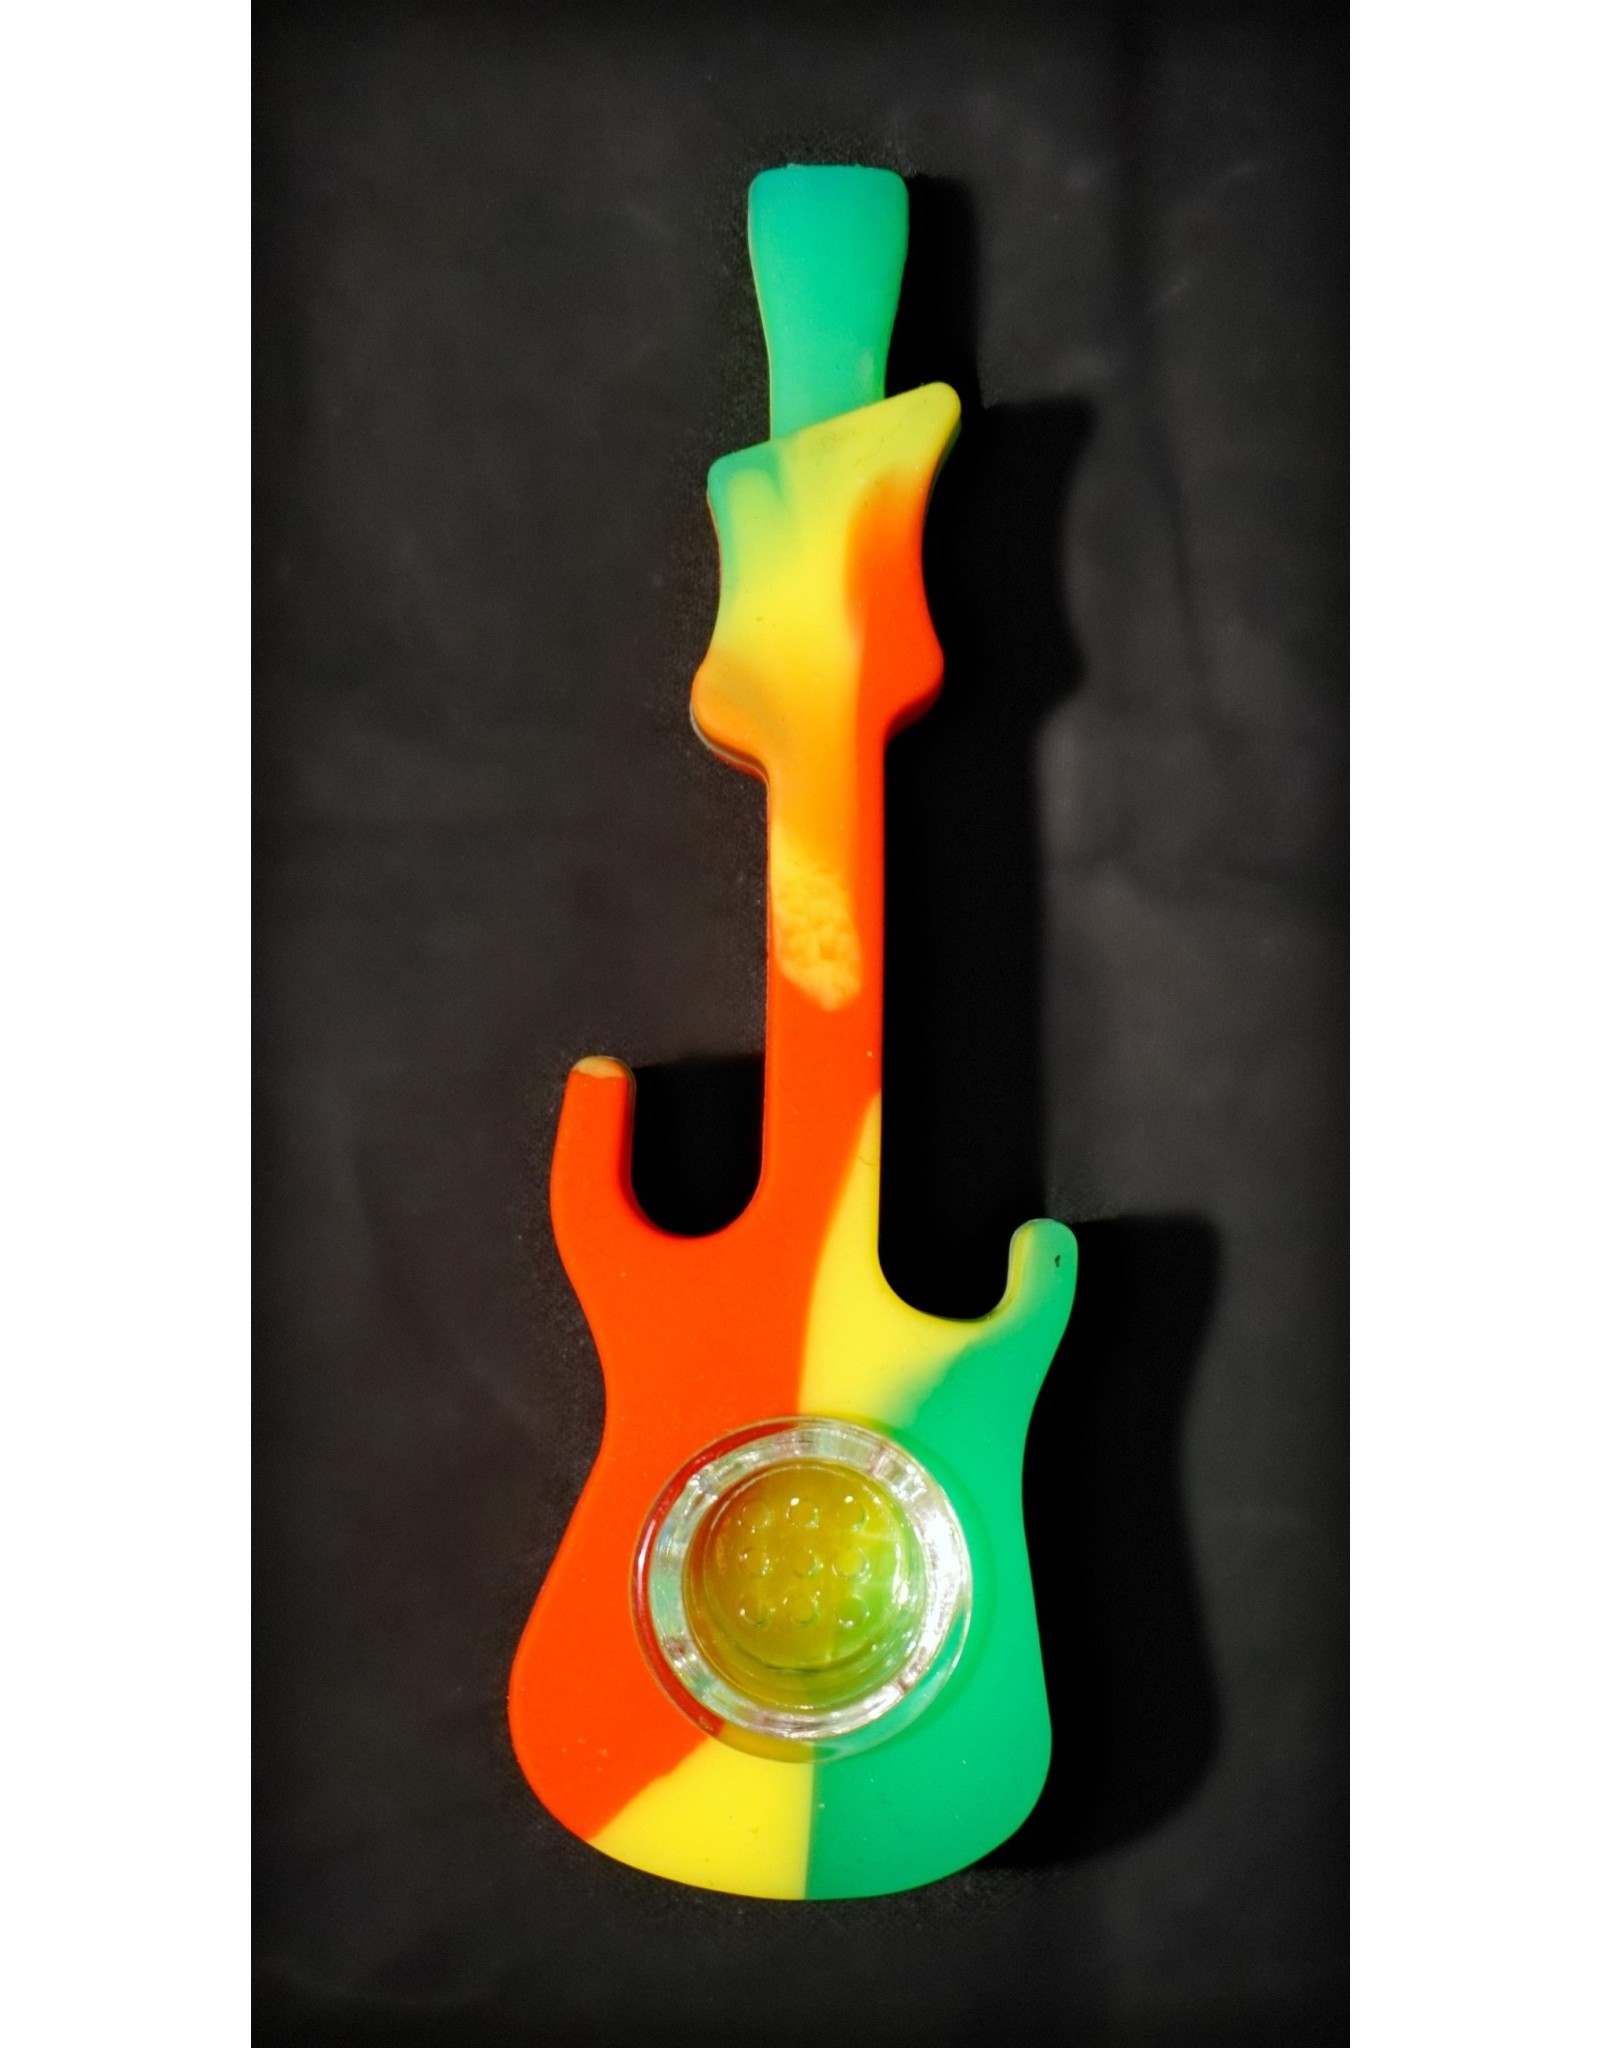 Silicone Guitar Handpipe - Assorted Colors